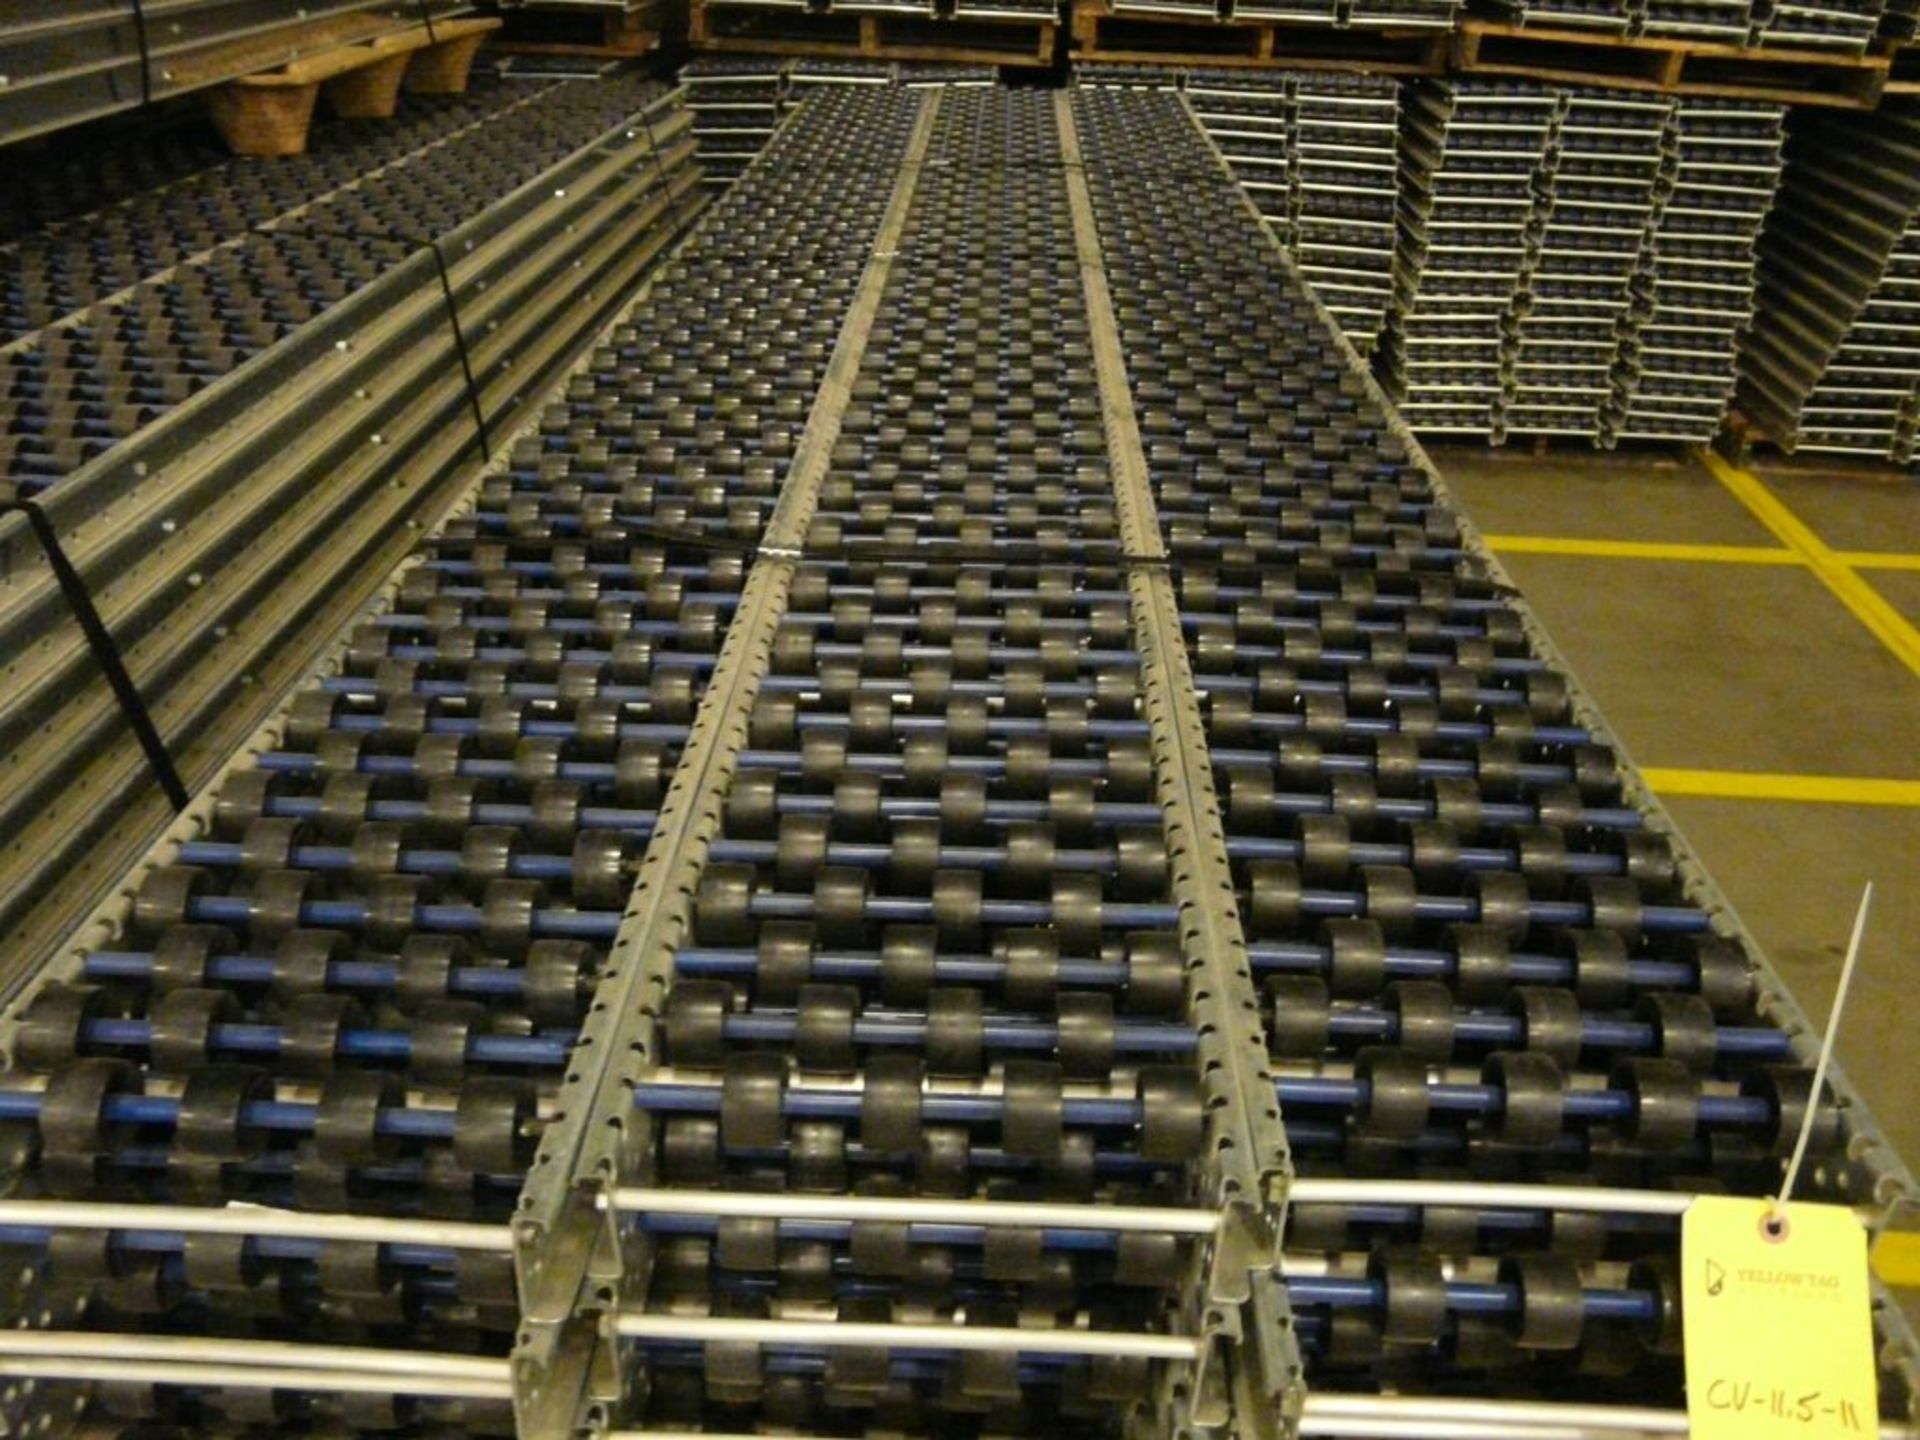 Lot of (90) SpanTrack Wheelbed Carton Flow Conveyors - 11.5'L x 11"W; Tag: 224229 - $30 Lot - Image 3 of 4